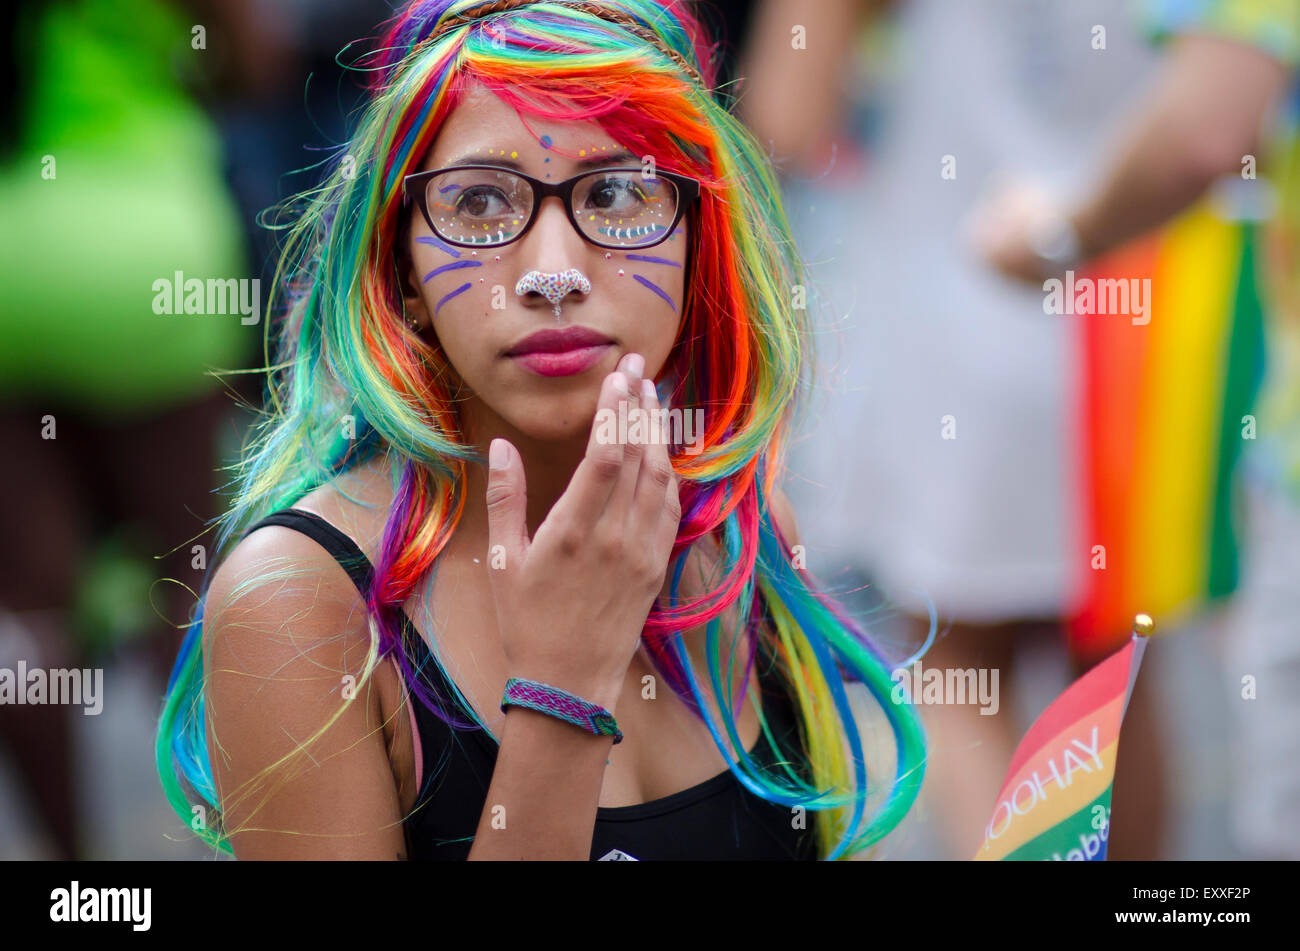 NEW YORK CITY, USA - JUNE 28, 2015: Young woman dressed in colorful wig looks at the festivities of the annual Pride Parade. Stock Photo